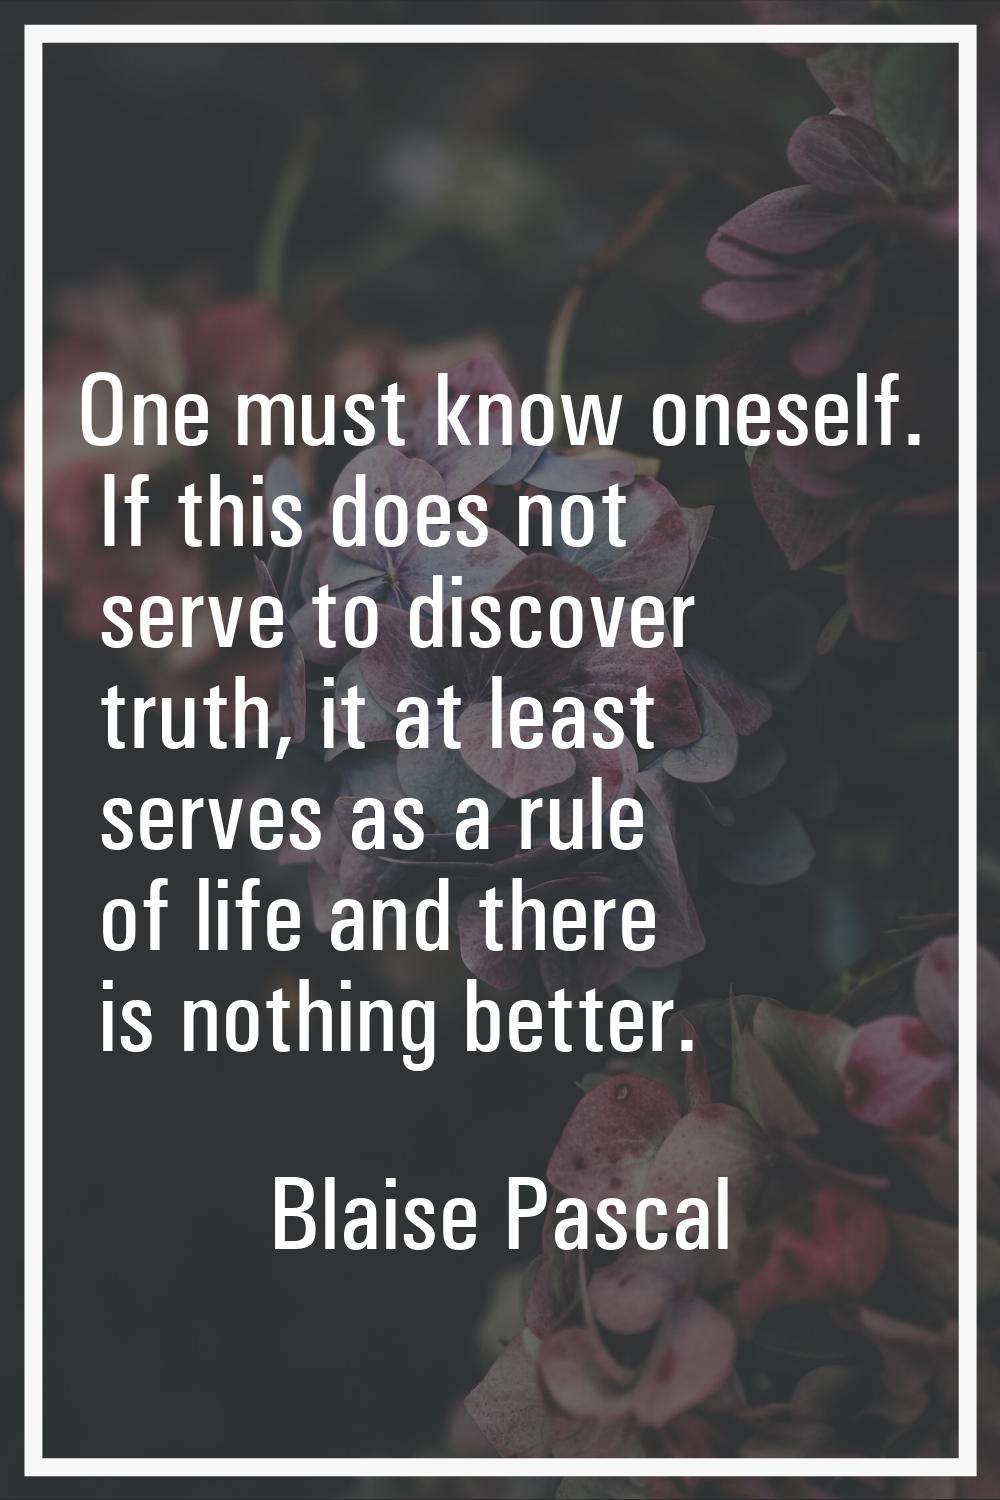 One must know oneself. If this does not serve to discover truth, it at least serves as a rule of li